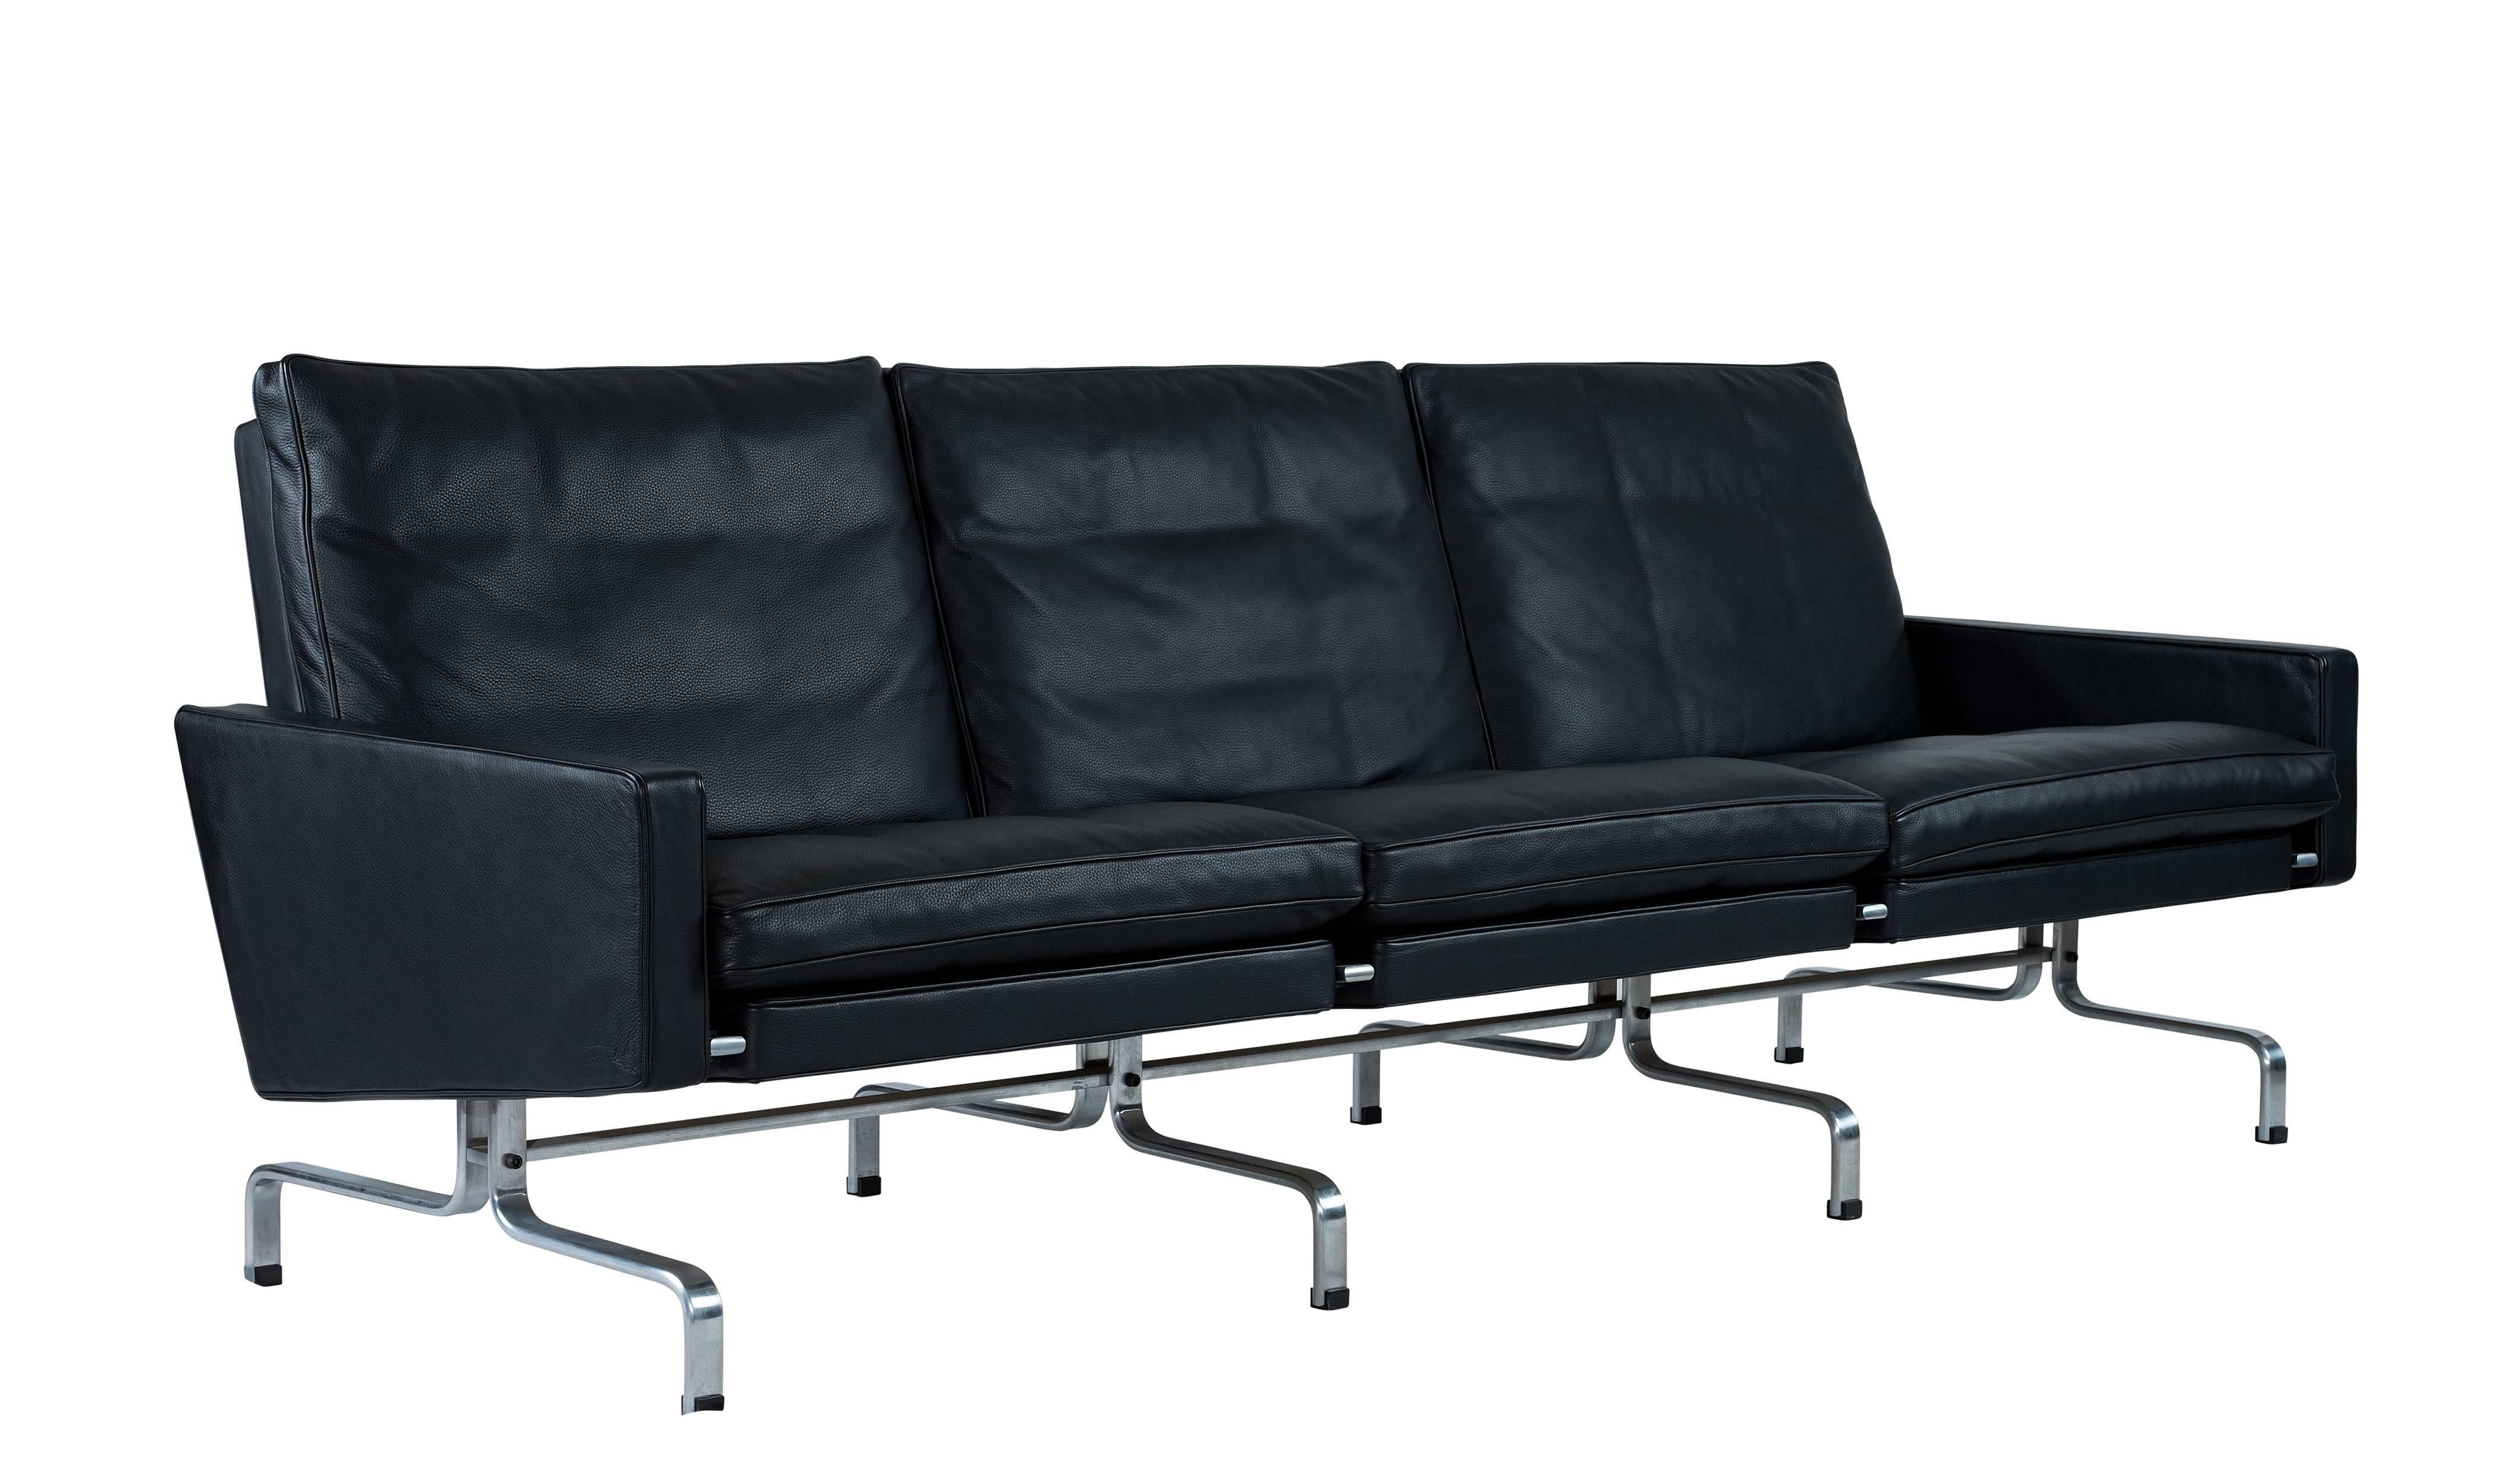 Poul Kjærholm PK31 three-seat sofa Designed in 1958 and Produced by Fritz Hansen in 2007. We have another matching sofa that is available.